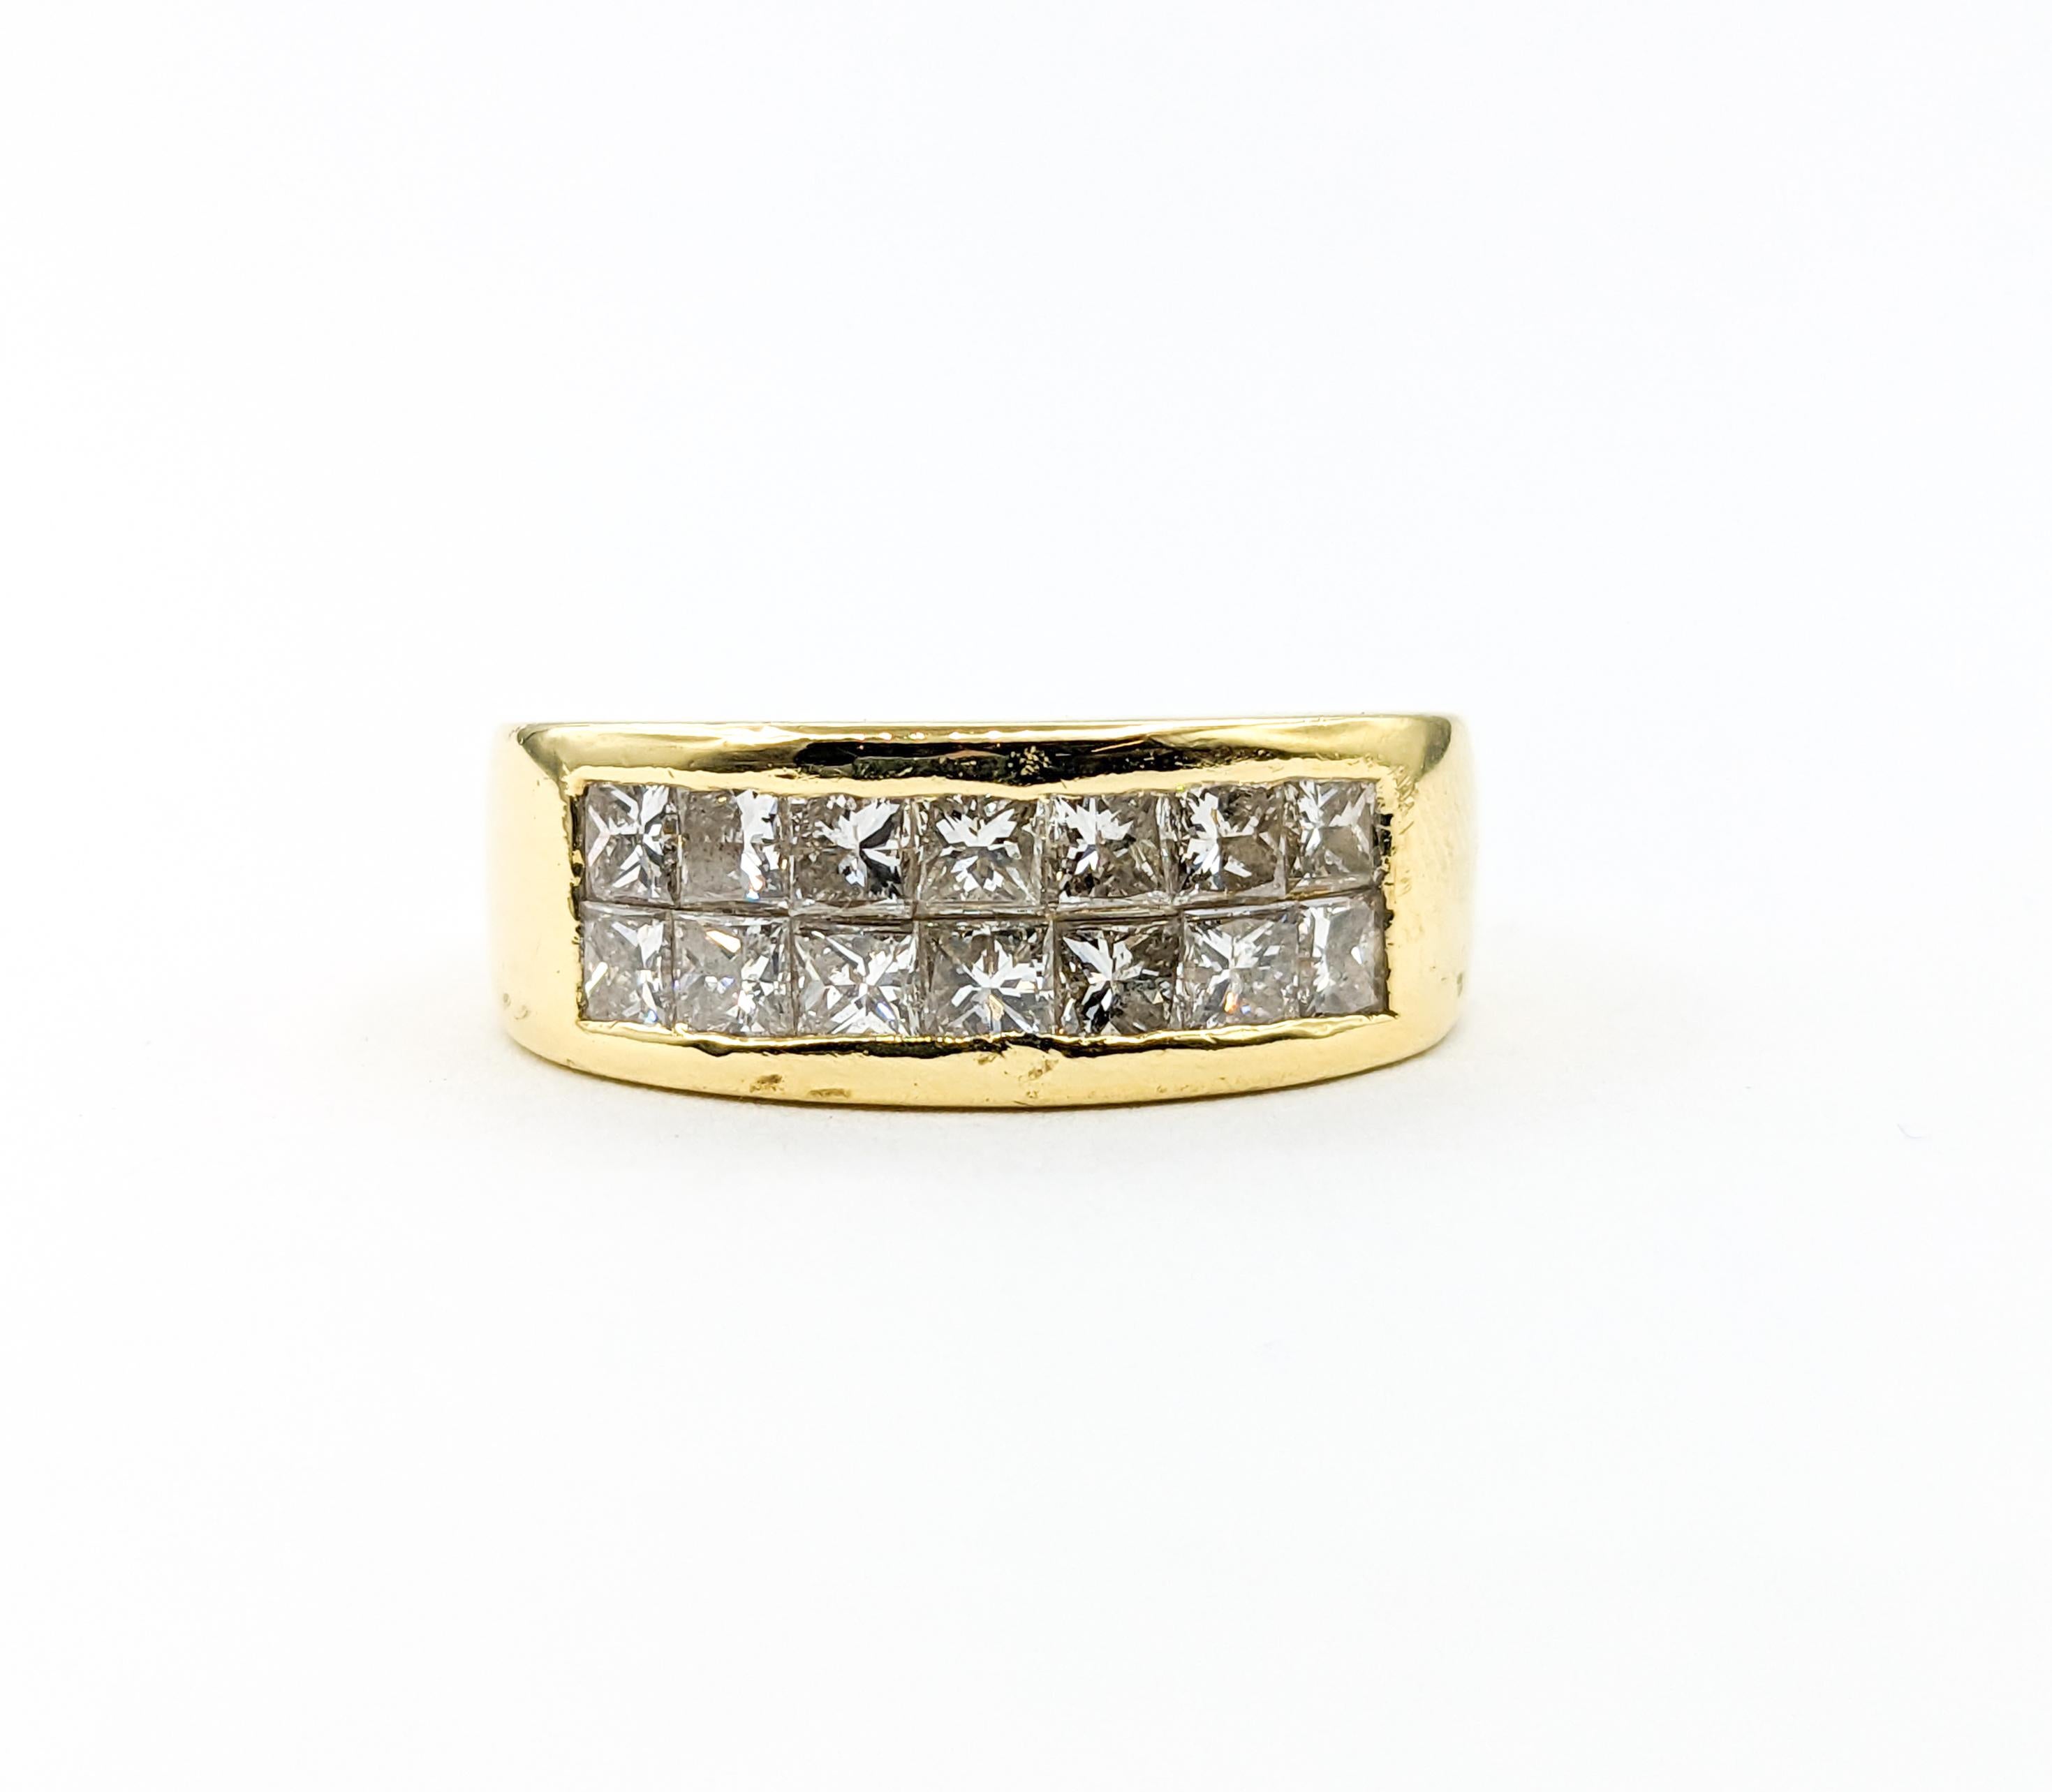 1.50ctw Princess-cut Diamond Ring In Yellow Gold

Behold the splendor of this magnificent two-row ring, elegantly fashioned from 18kt yellow gold, boasting a total of 1.50 carats of princess-cut diamonds. These resplendent diamonds gleam with SI